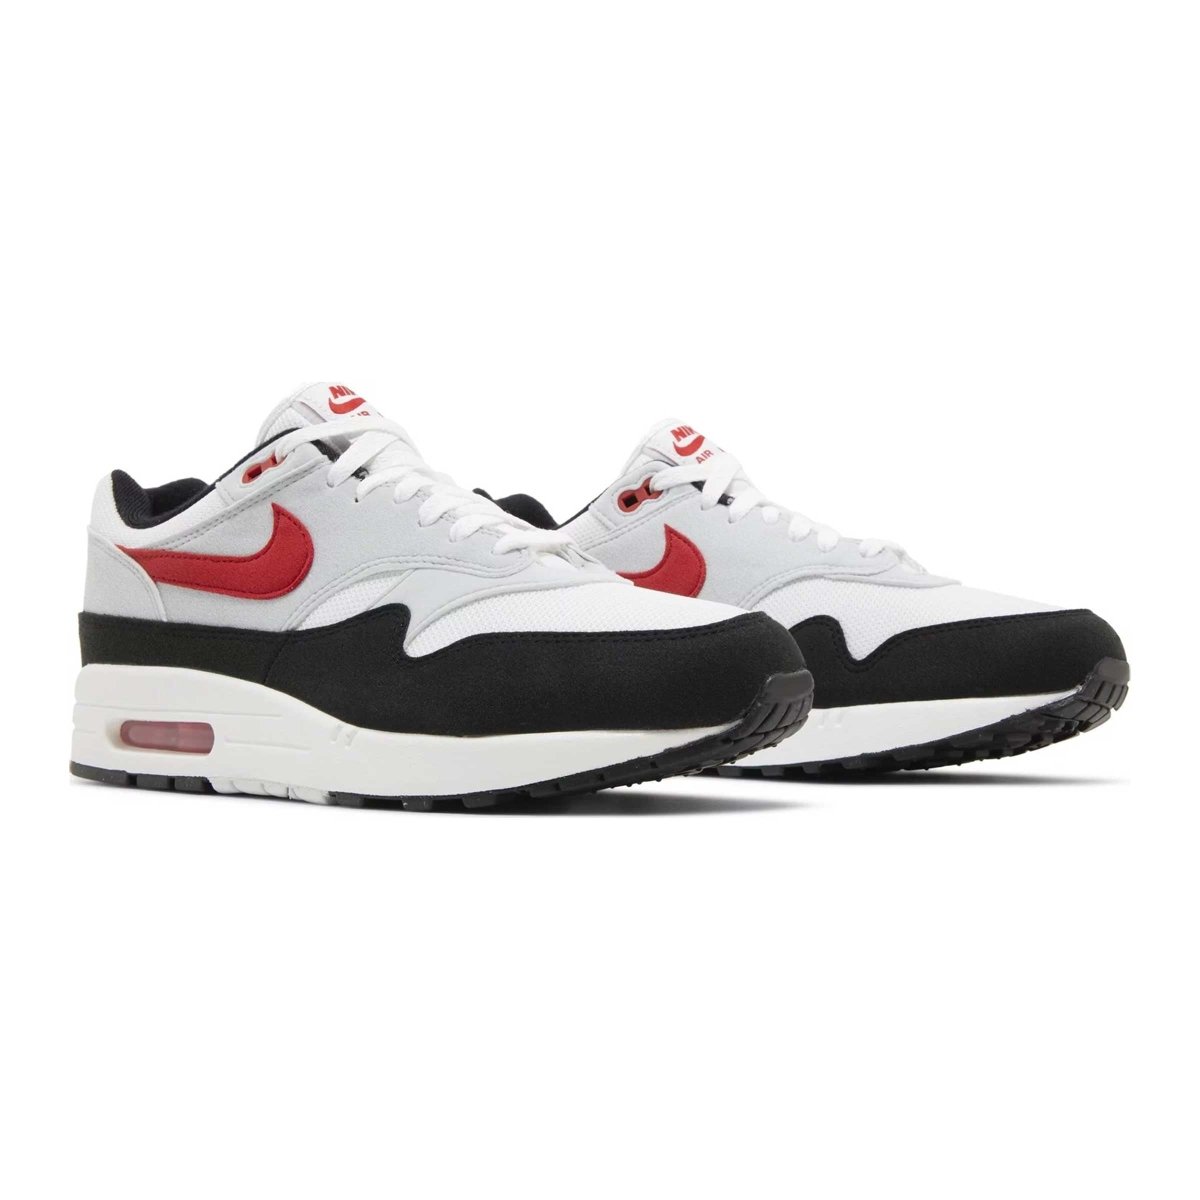 Nike Men's Air Max 1 'Chilli' - 10033922 - West NYC